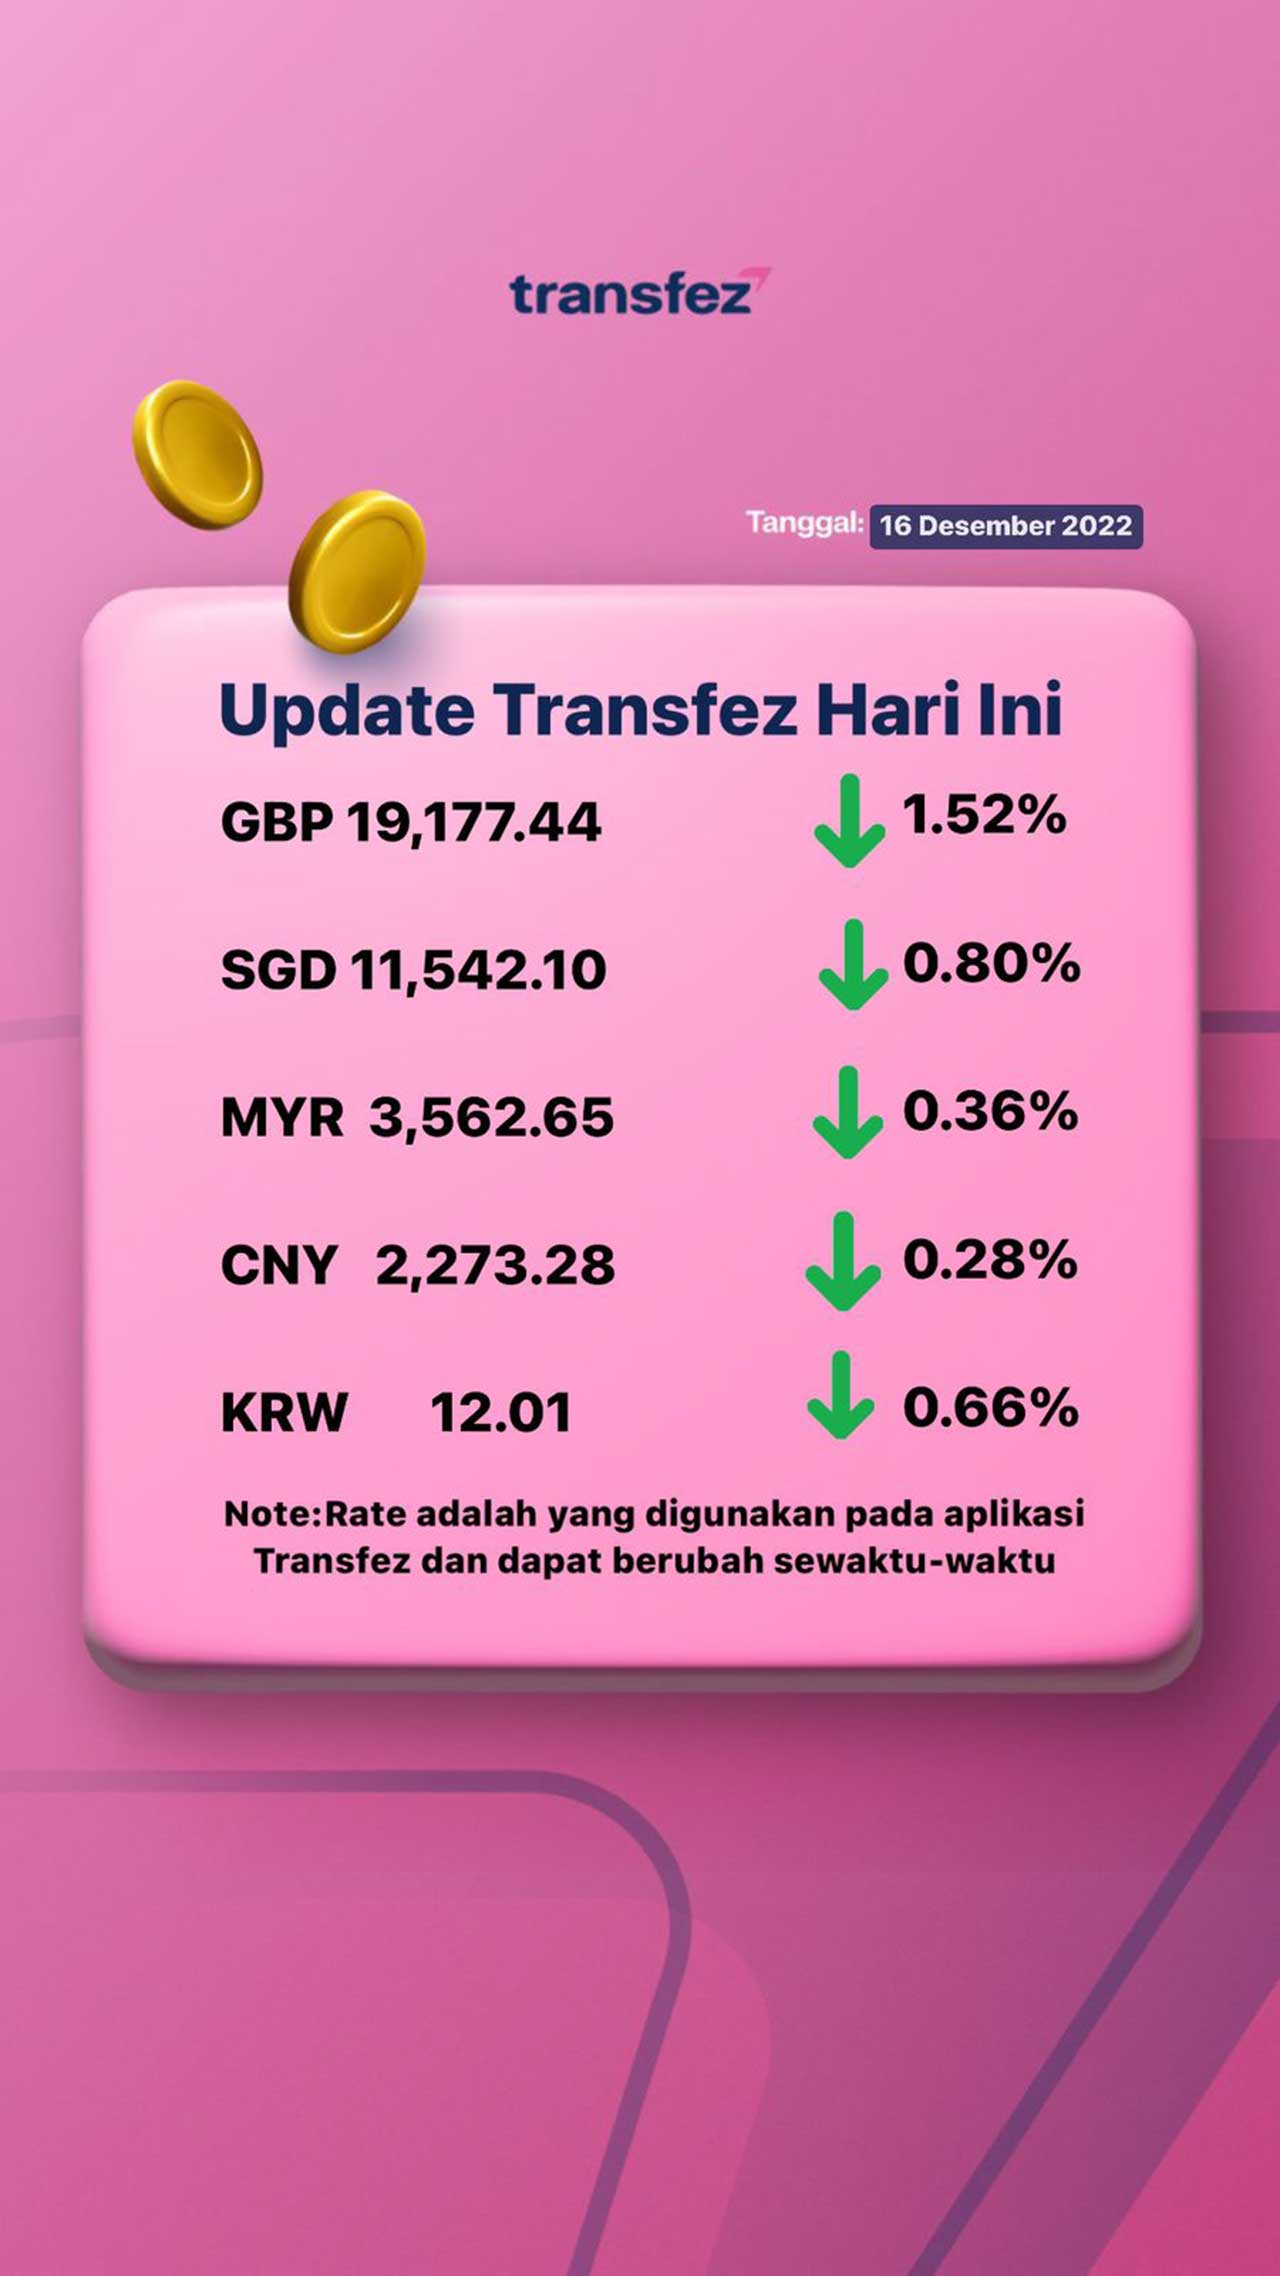 Today's Transfez Rate Update 16 December 2022